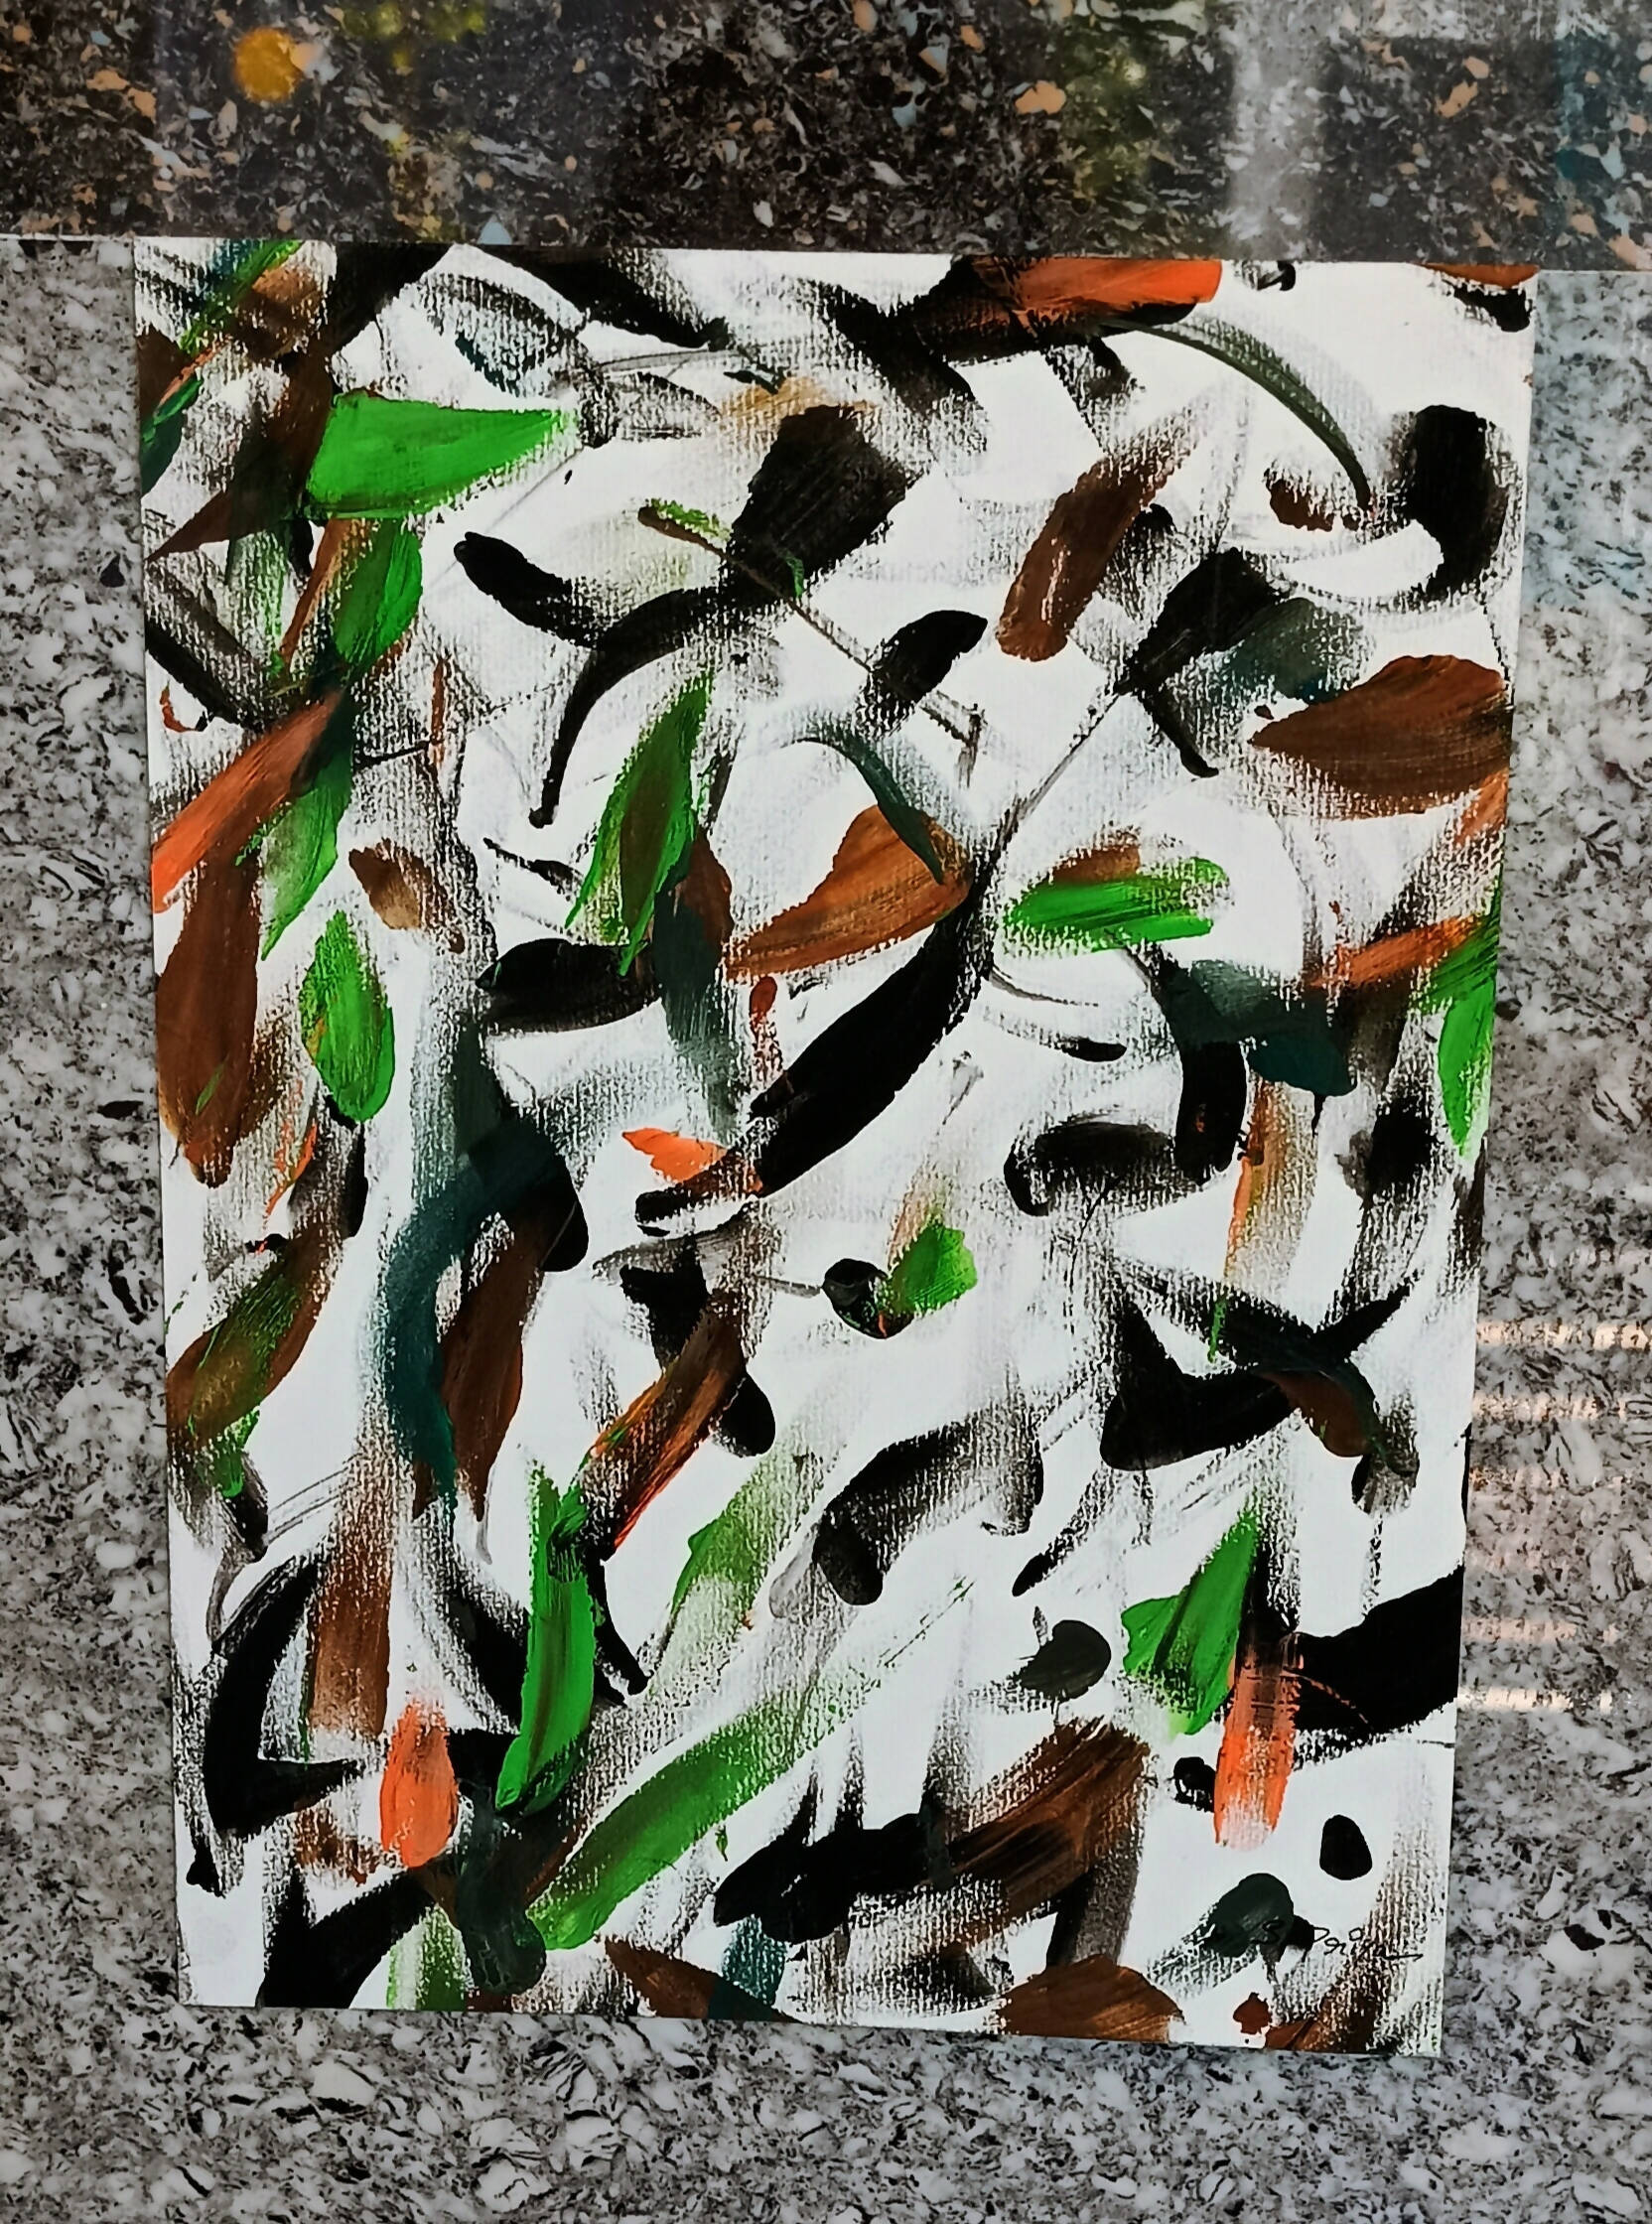 ABSTRACT PAINTING